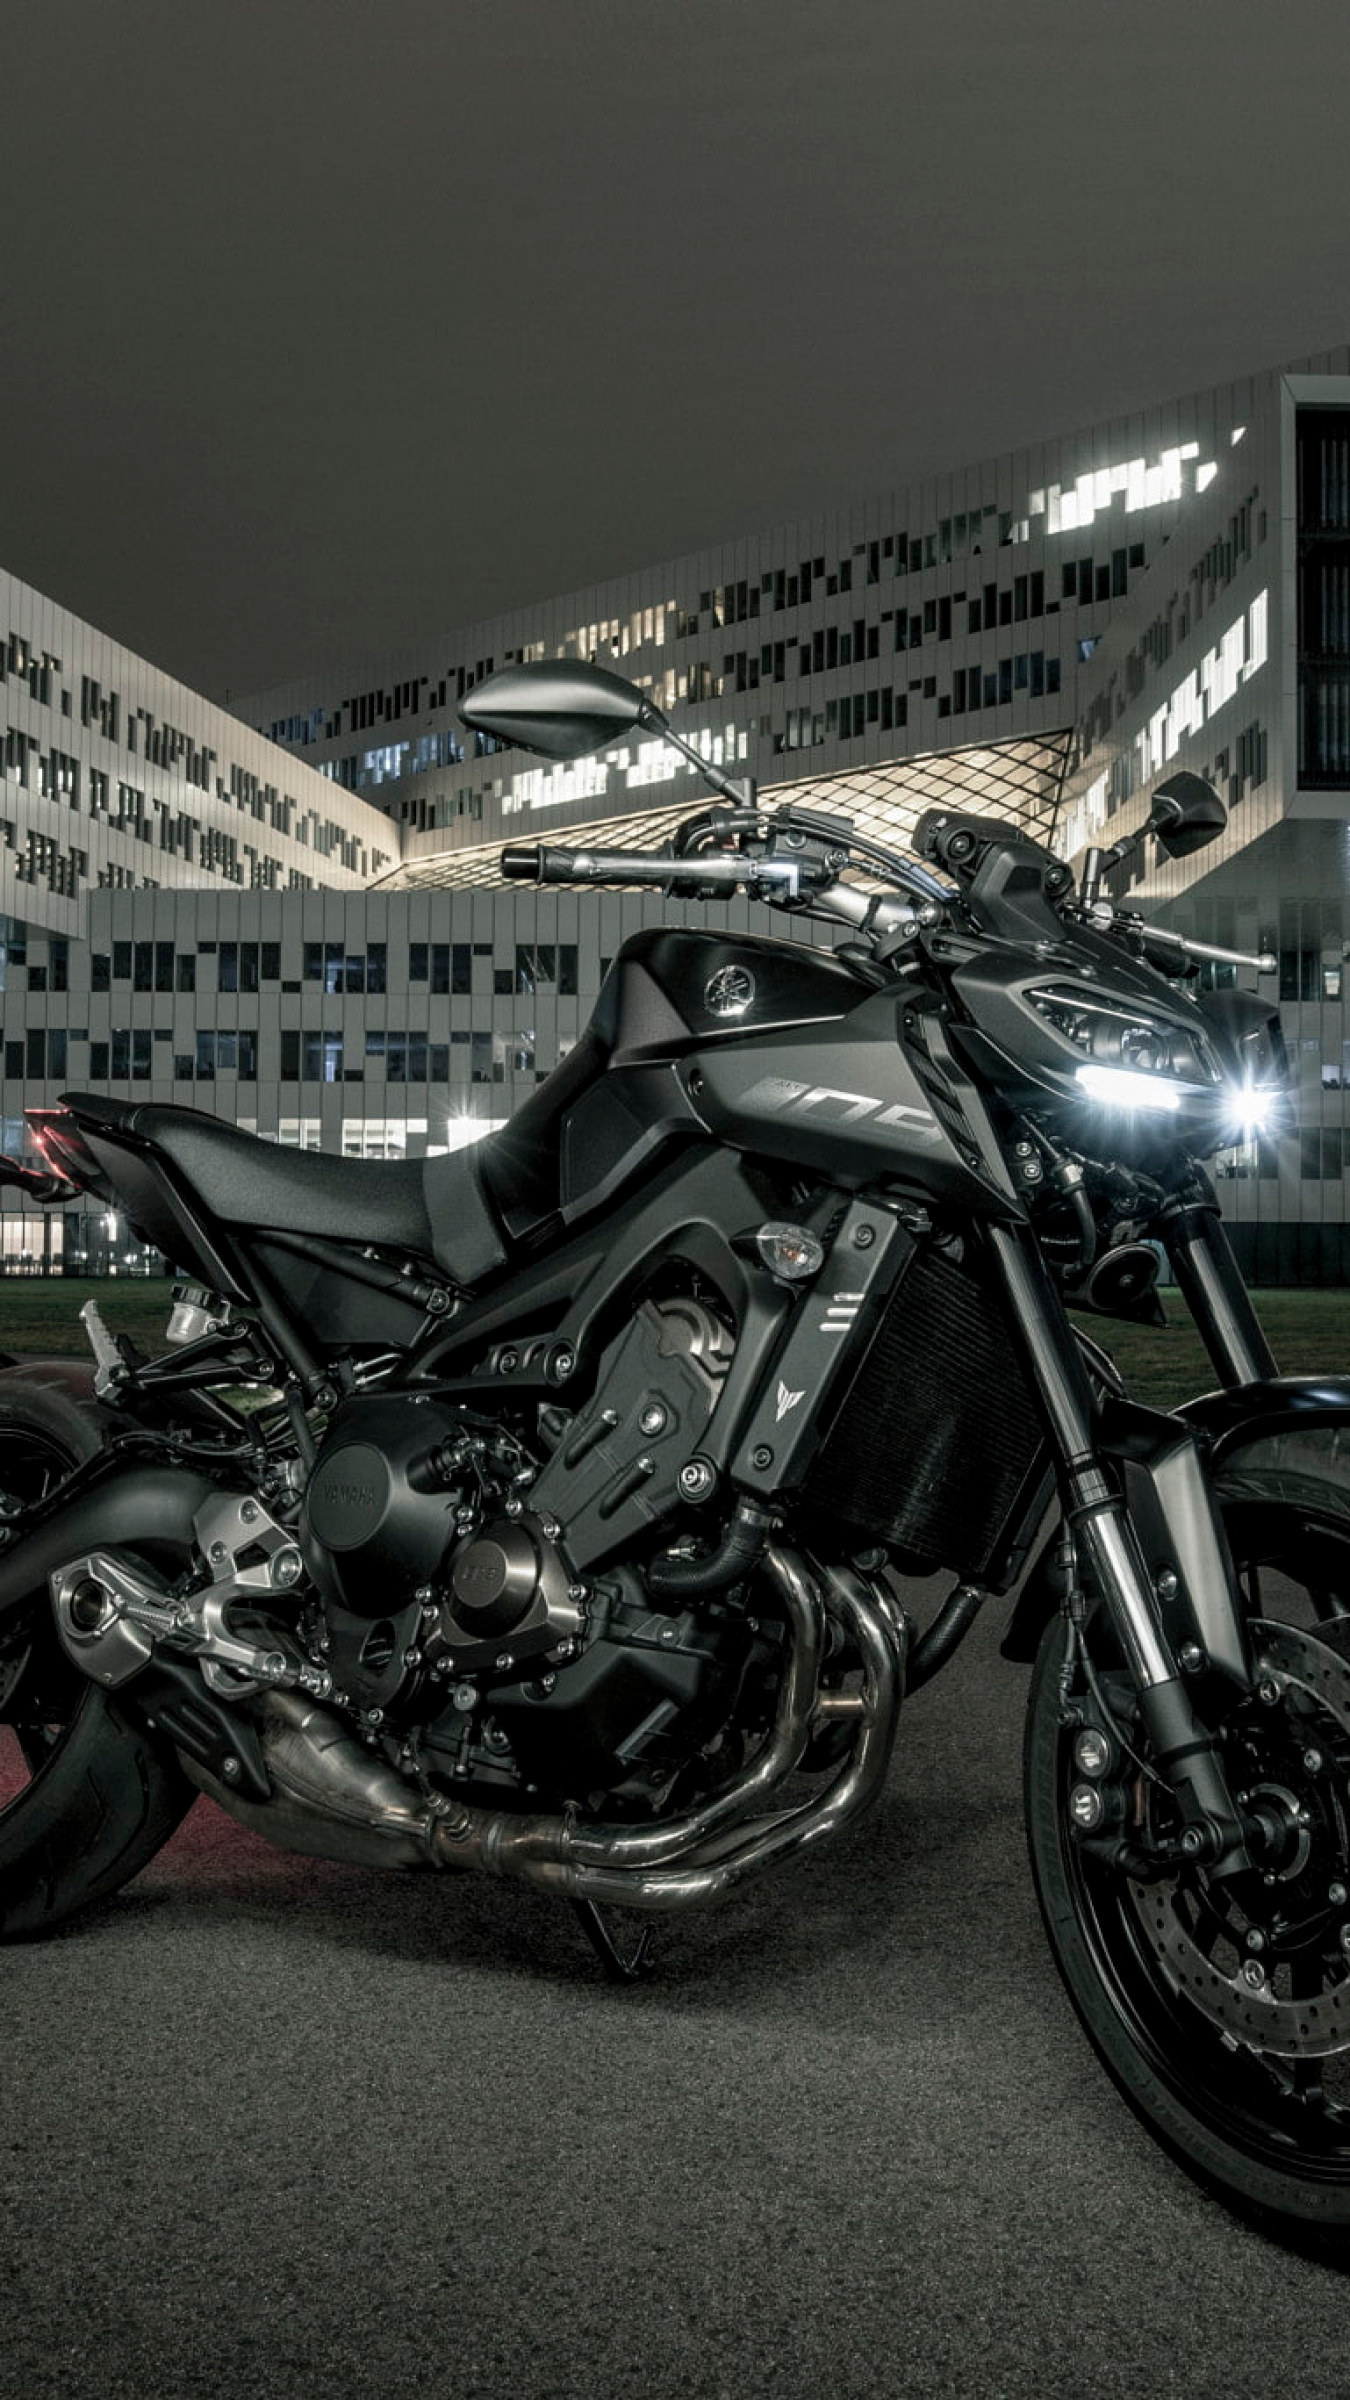 Yamaha MT-09, Motorcycle transportation, High-quality wallpapers, Photo gallery, 1350x2400 HD Phone